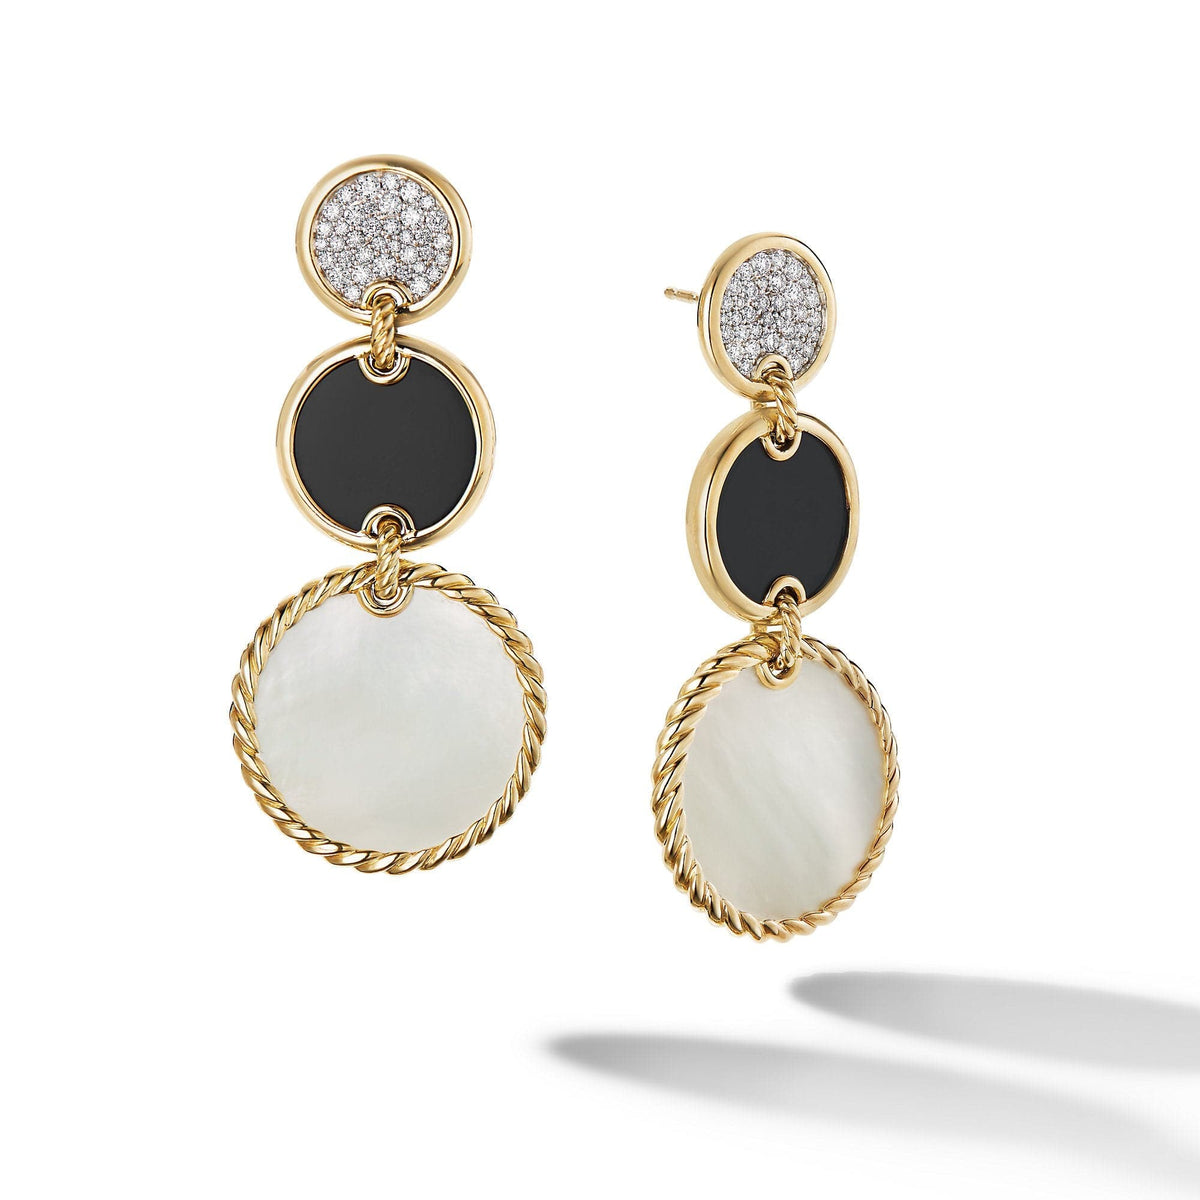 DY Elements Triple Drop Earrings in 18K Yellow Gold with Mother of Pearl, Black Onyx and Pavé Diamonds